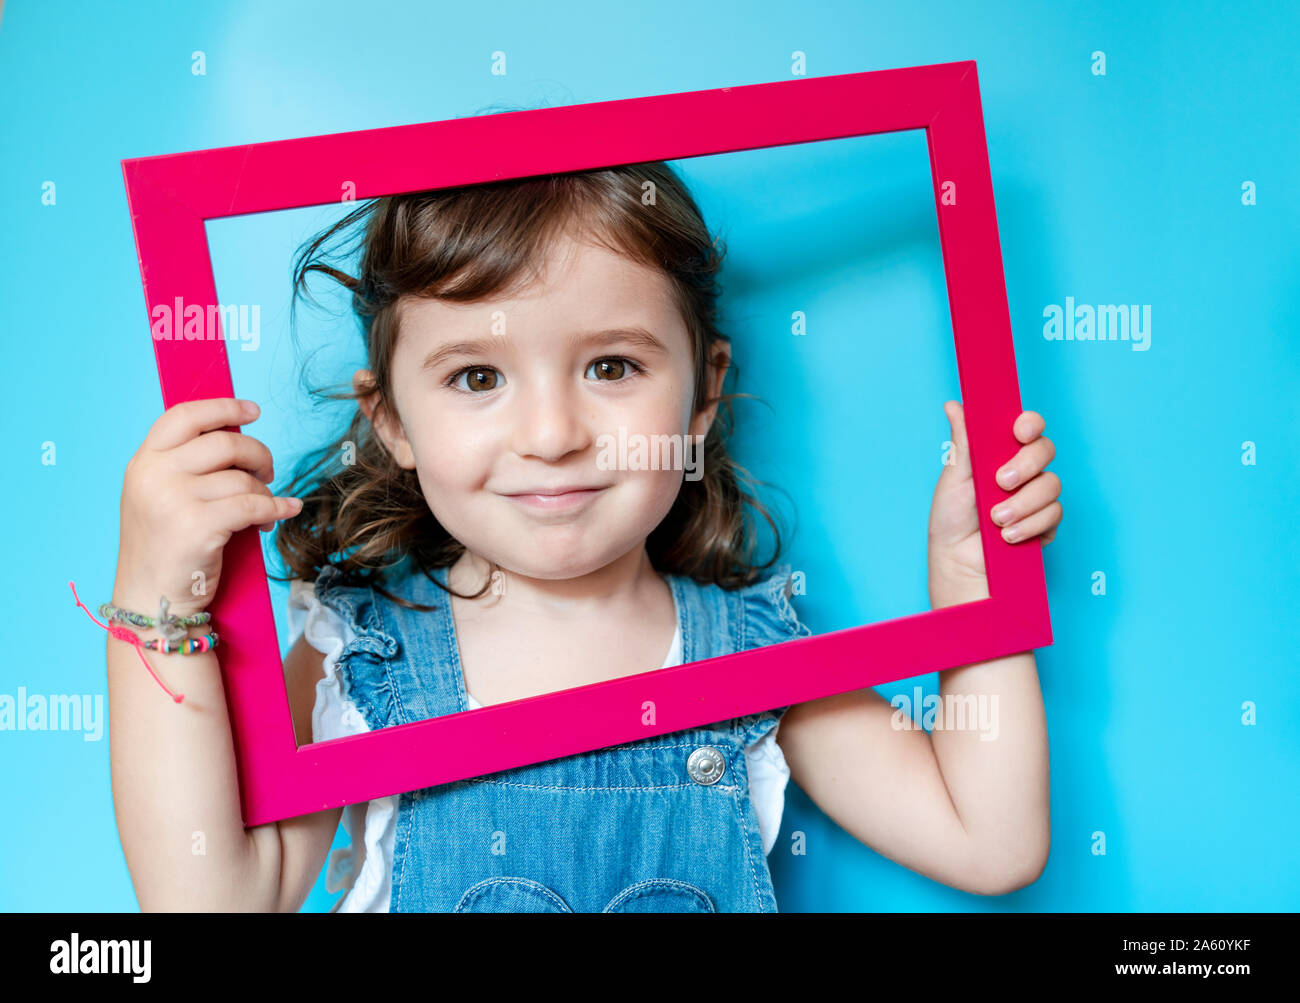 Portrait of cute little girl holding a picture frame on blue background Stock Photo